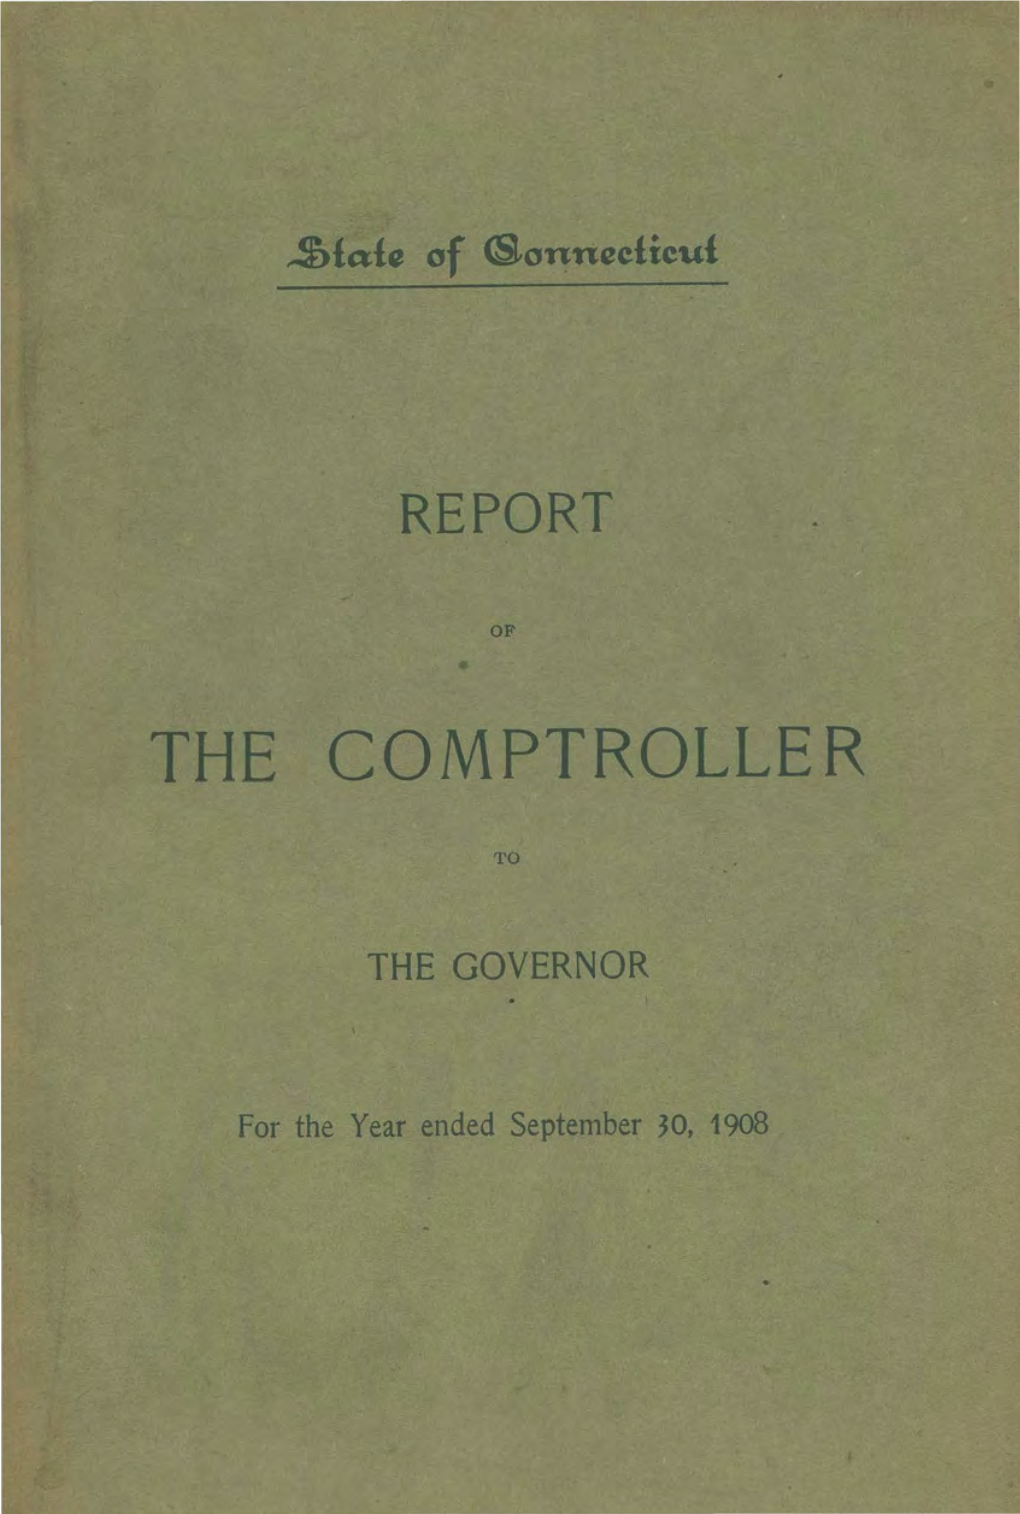 Report of the Comptroller to the Governor for the Fiscal Year Ended